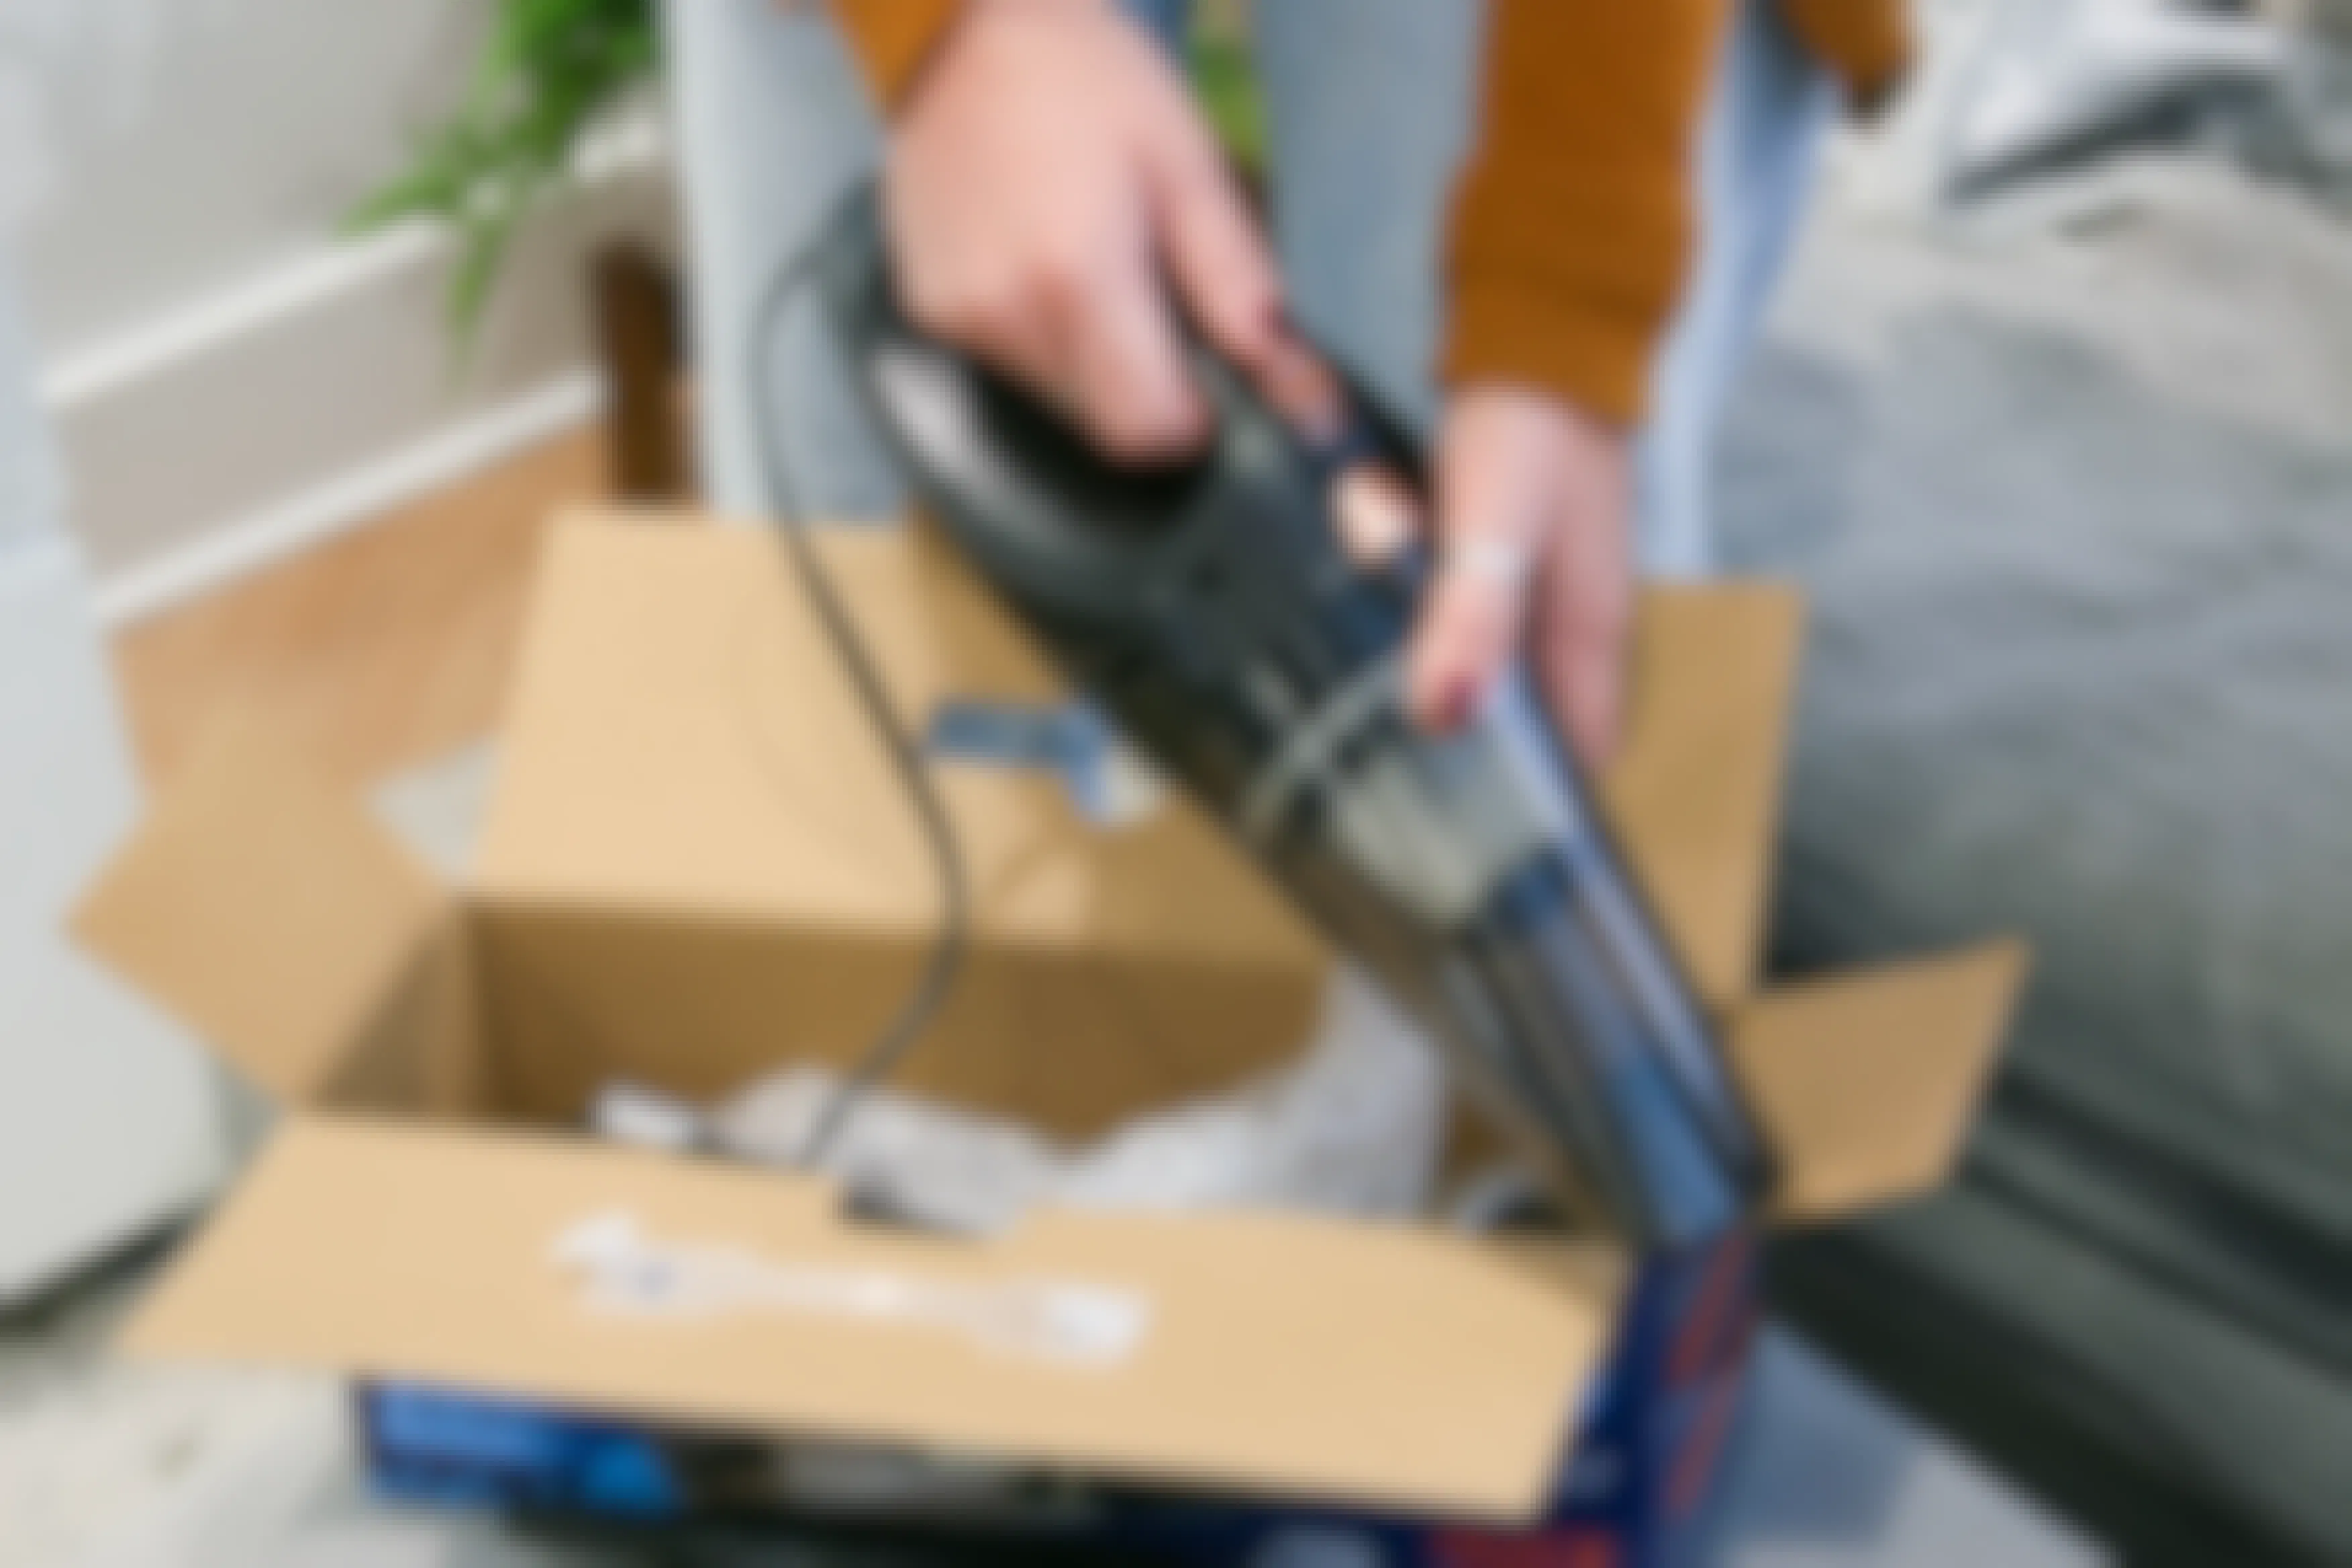 Corded car vacuum being held next to box